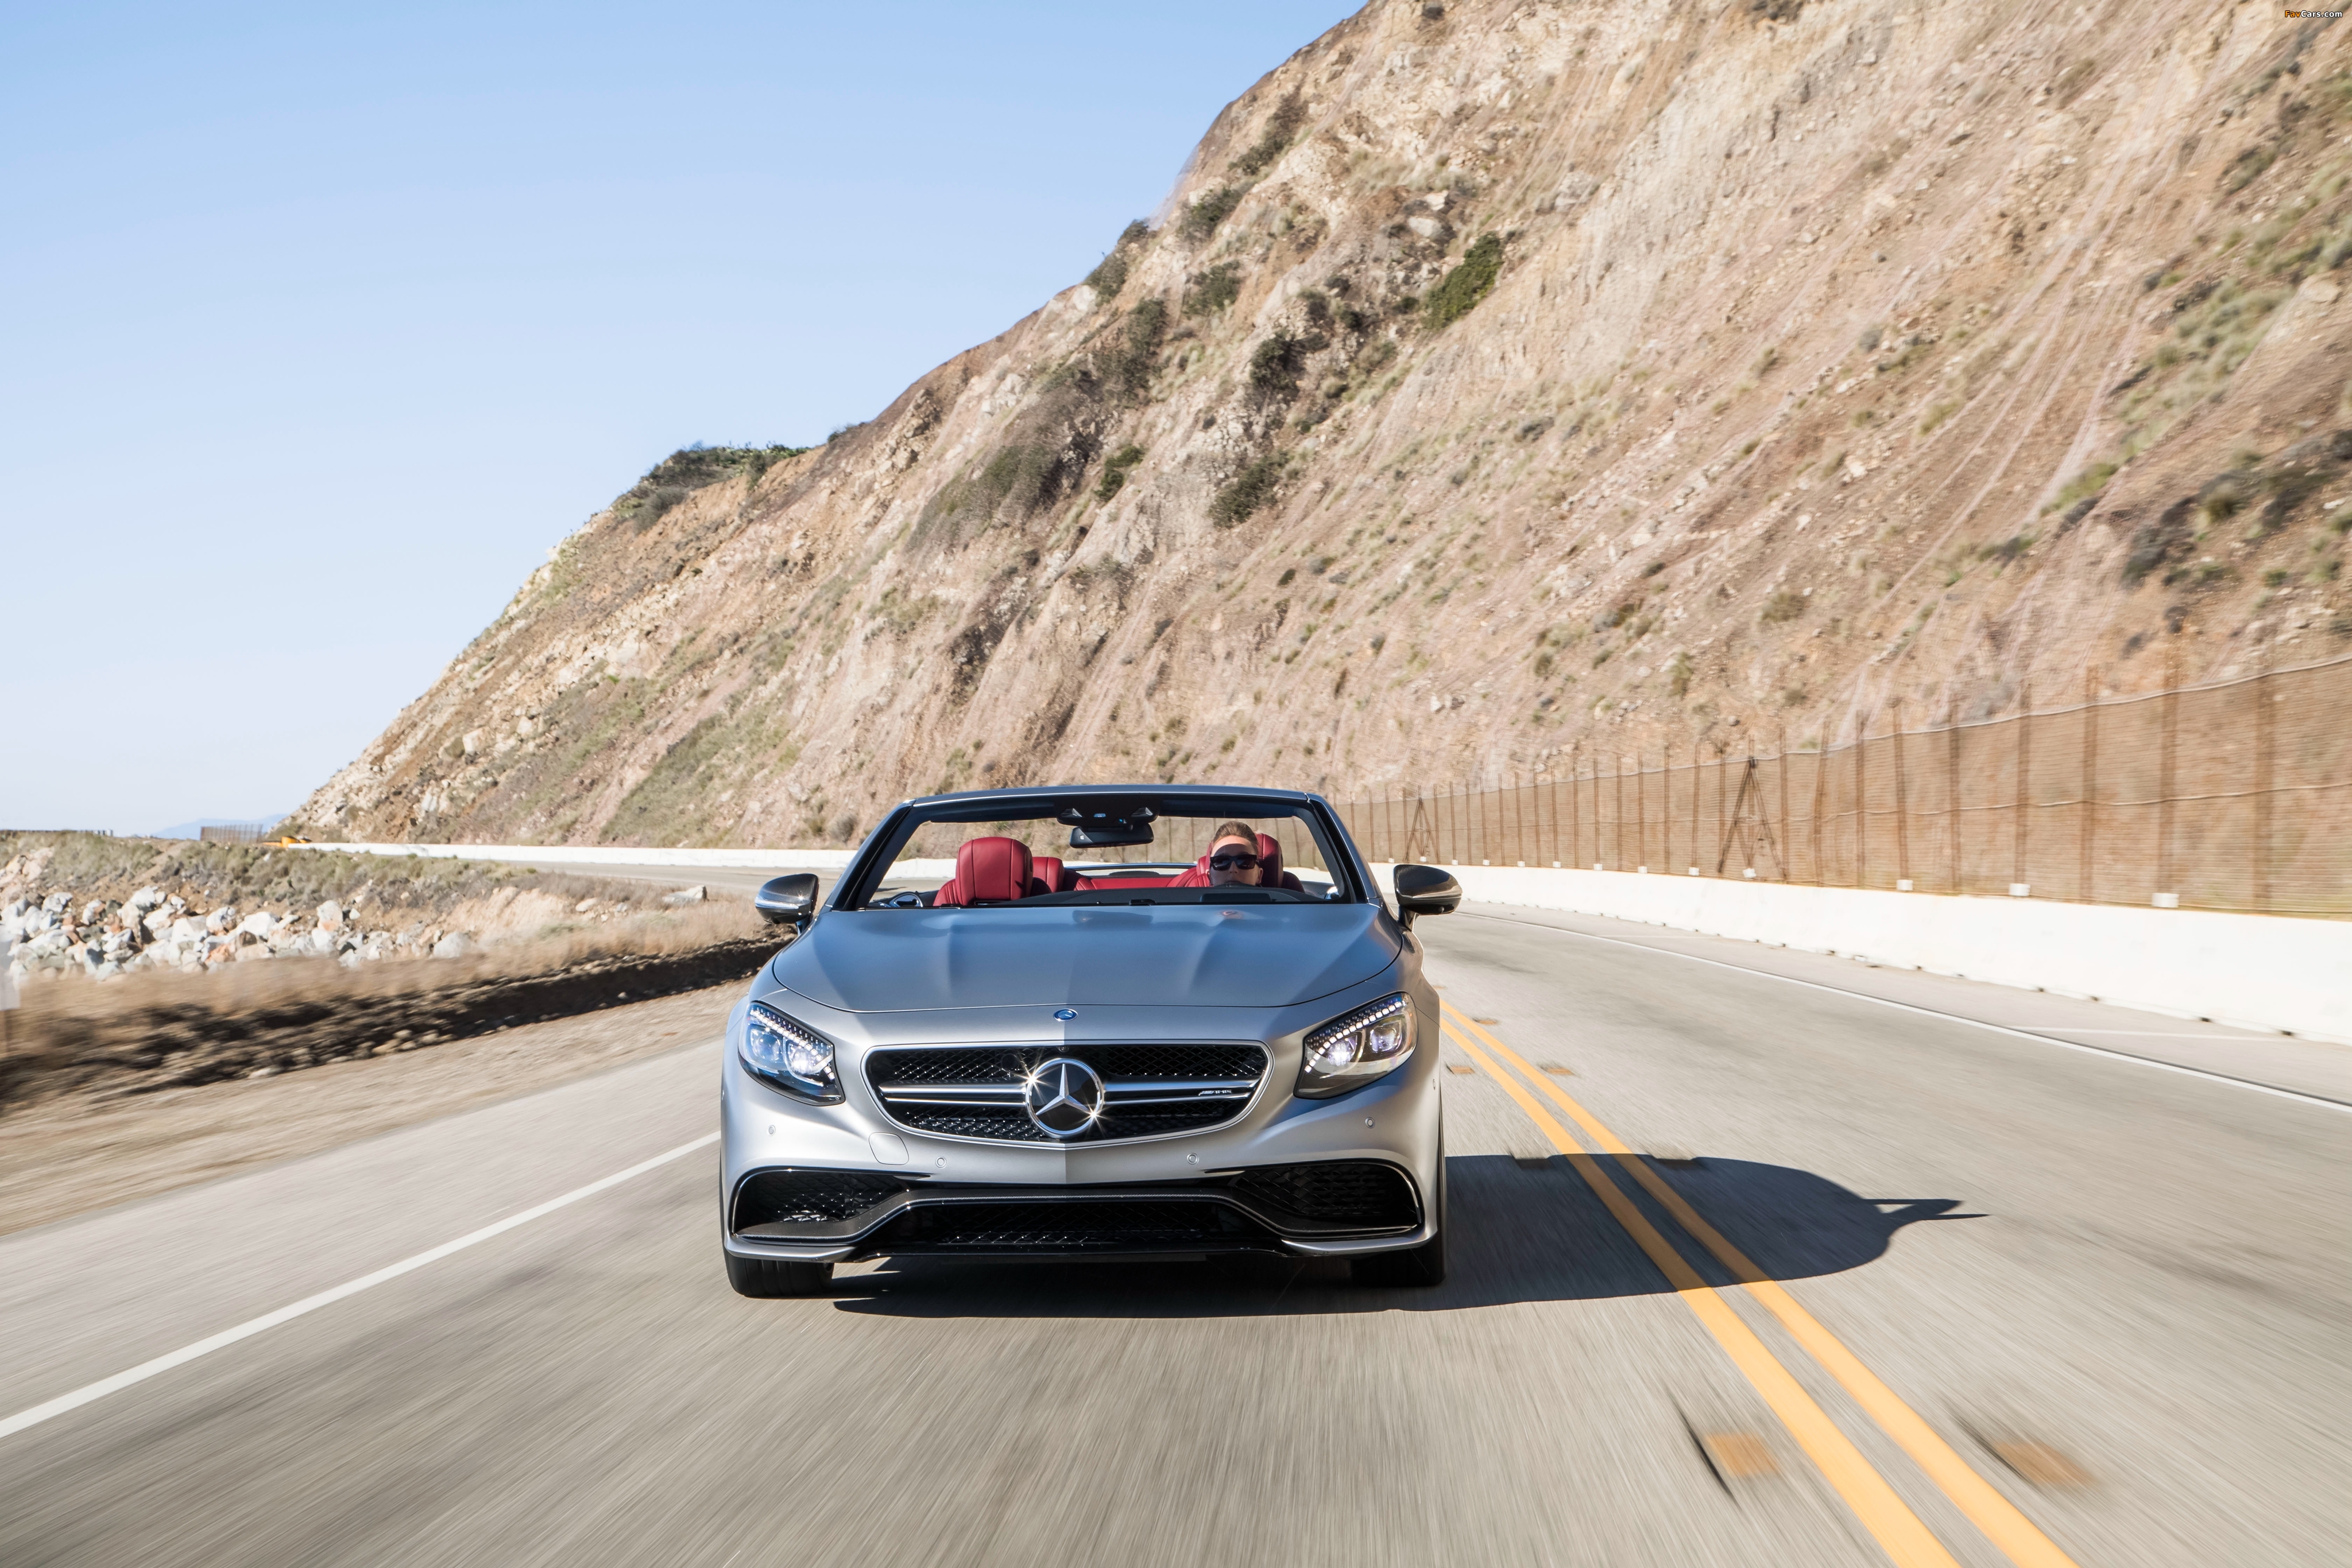 Mercedes-AMG S 63 Cabriolet North America (A217) 2016 pictures (4096 x 2731)